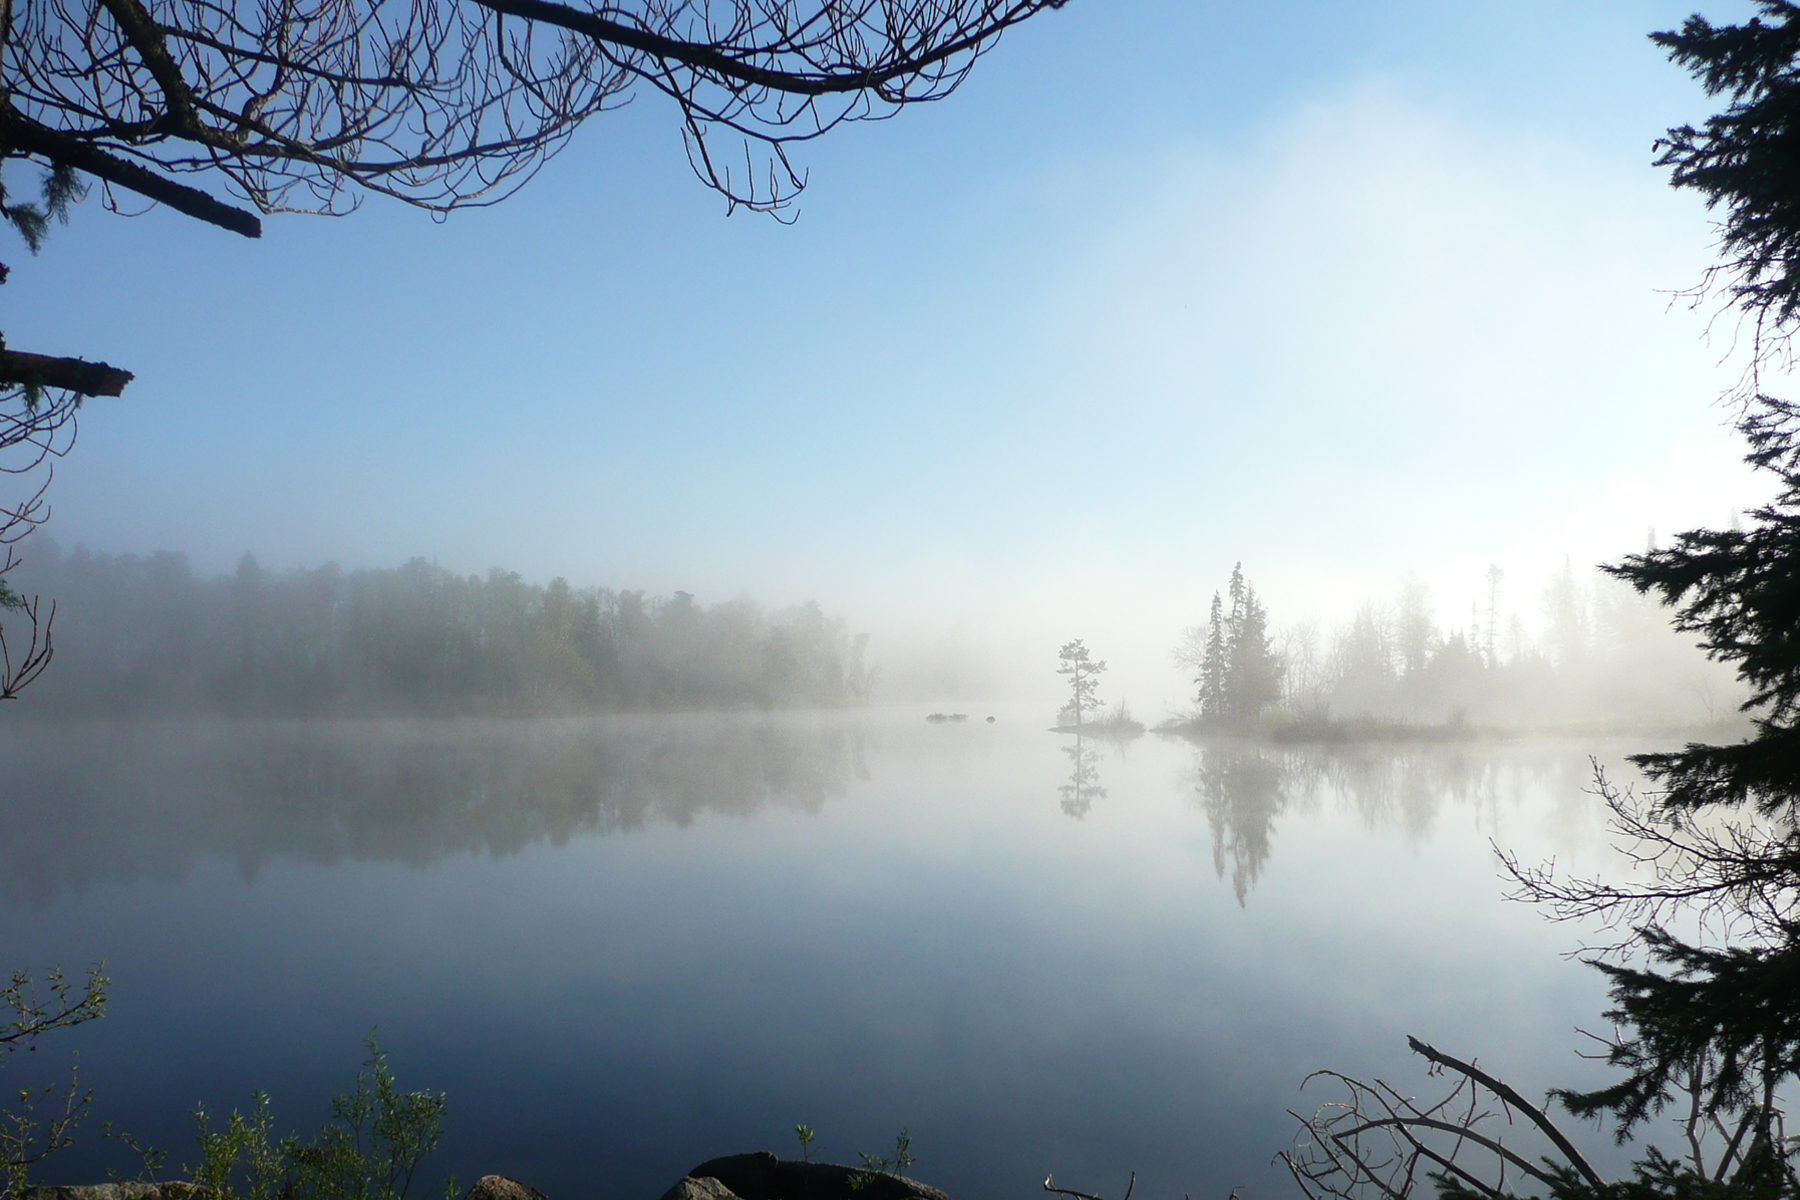 Boundary Waters Canoe Area Wilderness by Steven Conry via Flickr